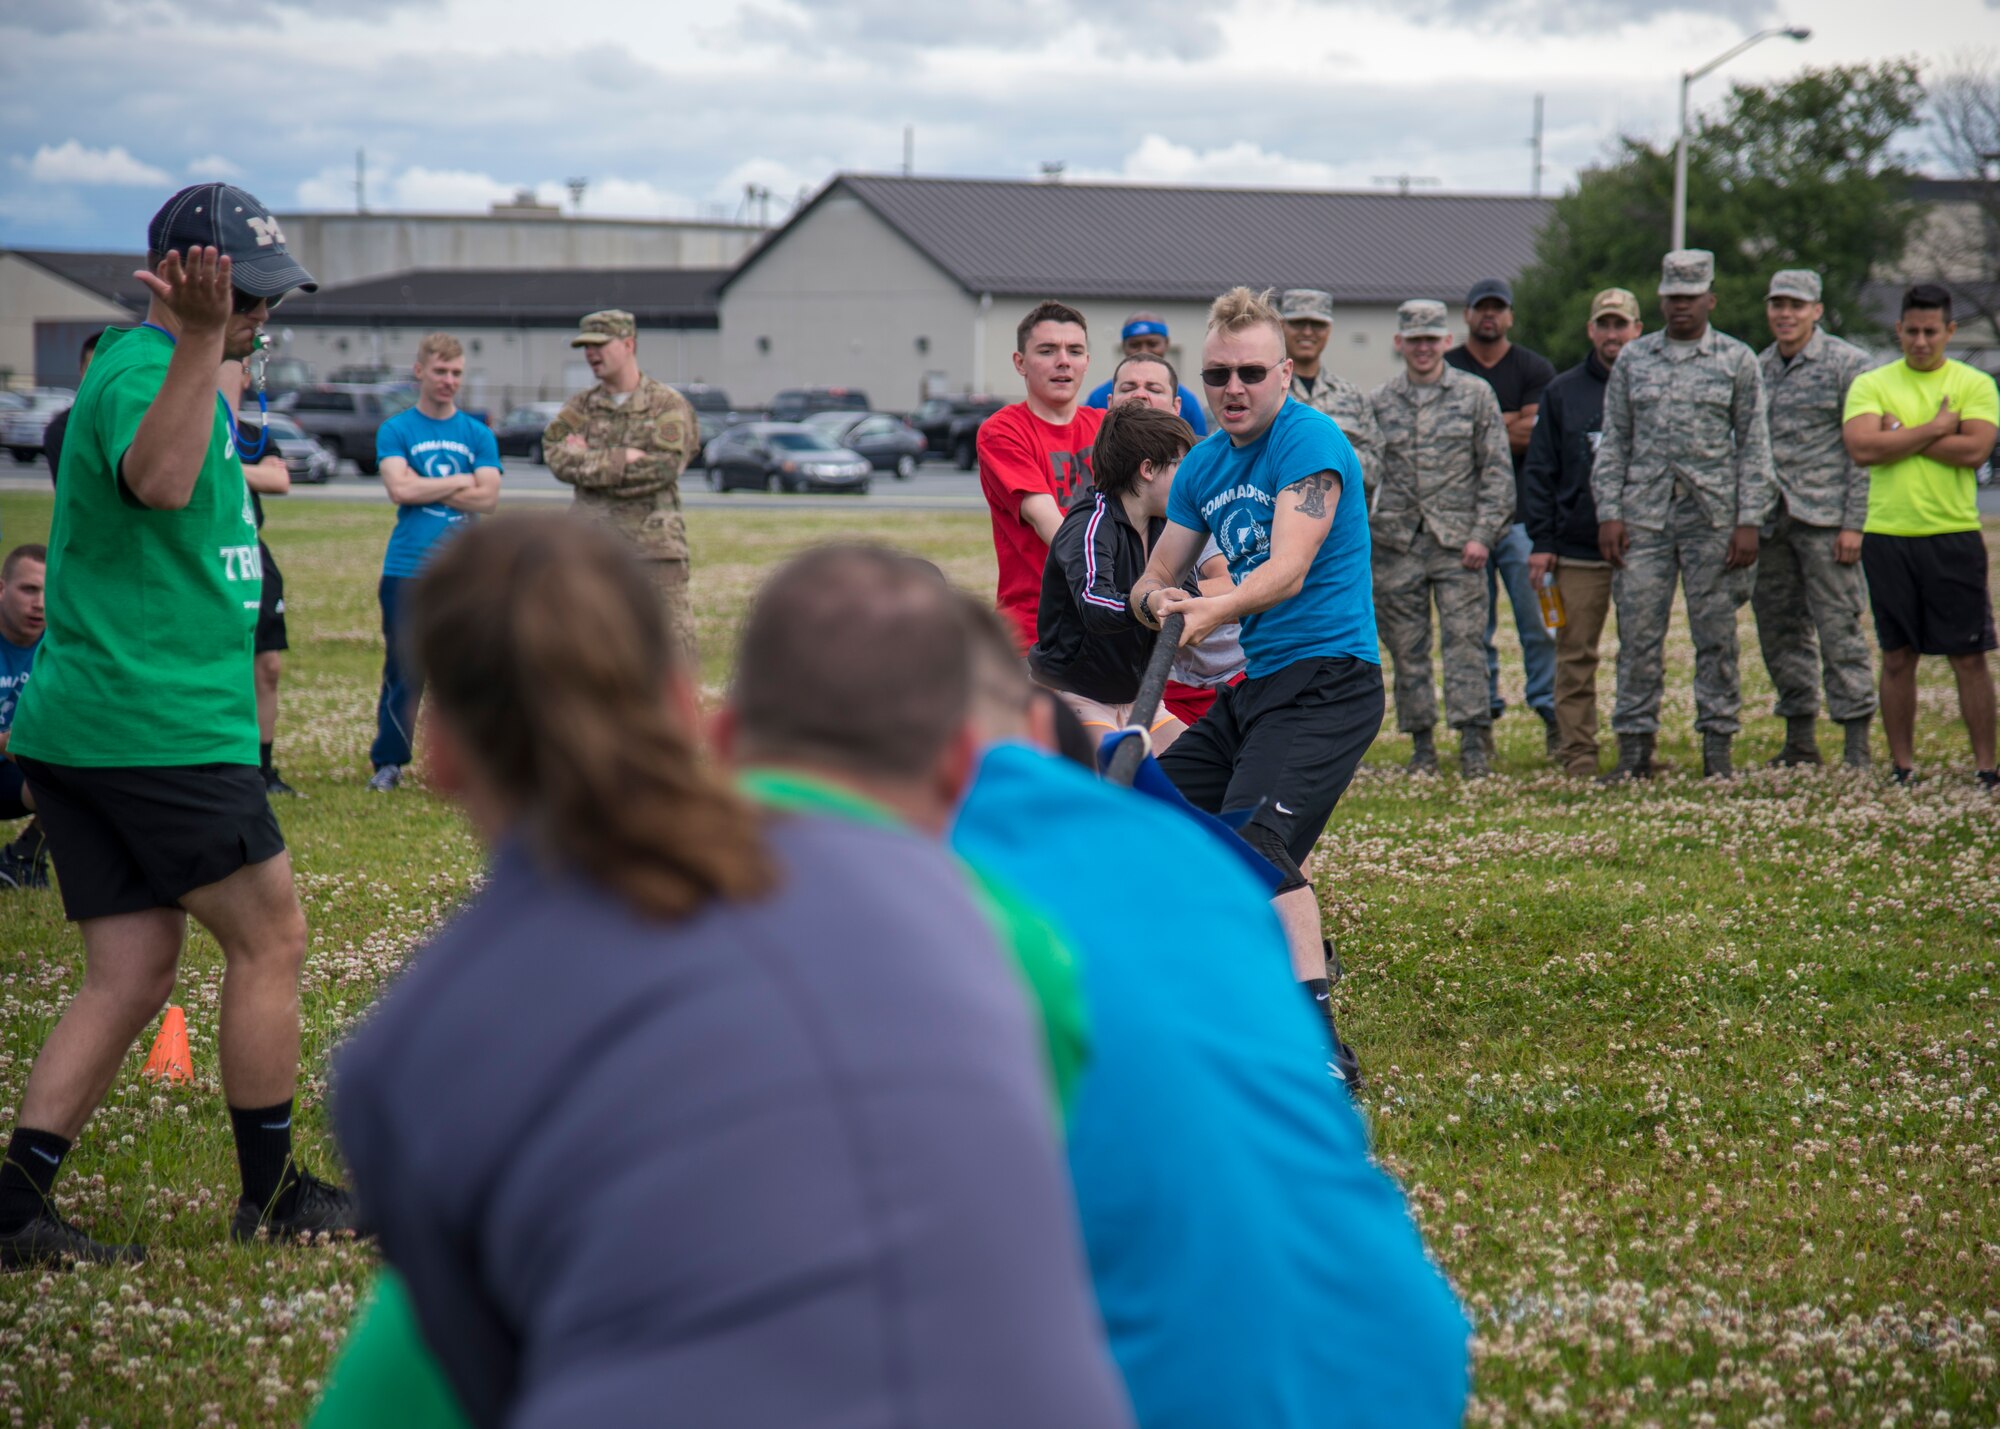 The referee signals the end of the round, declaring a winner June 14, 2019 at Dover Air Force Base, Del. The tug-of-war event had eleven teams battling for the number one slot in the competition, which was taken by the 436th Logistics Readiness Squadron. (U.S. Air Force photo by A1C Jonathan Harding)